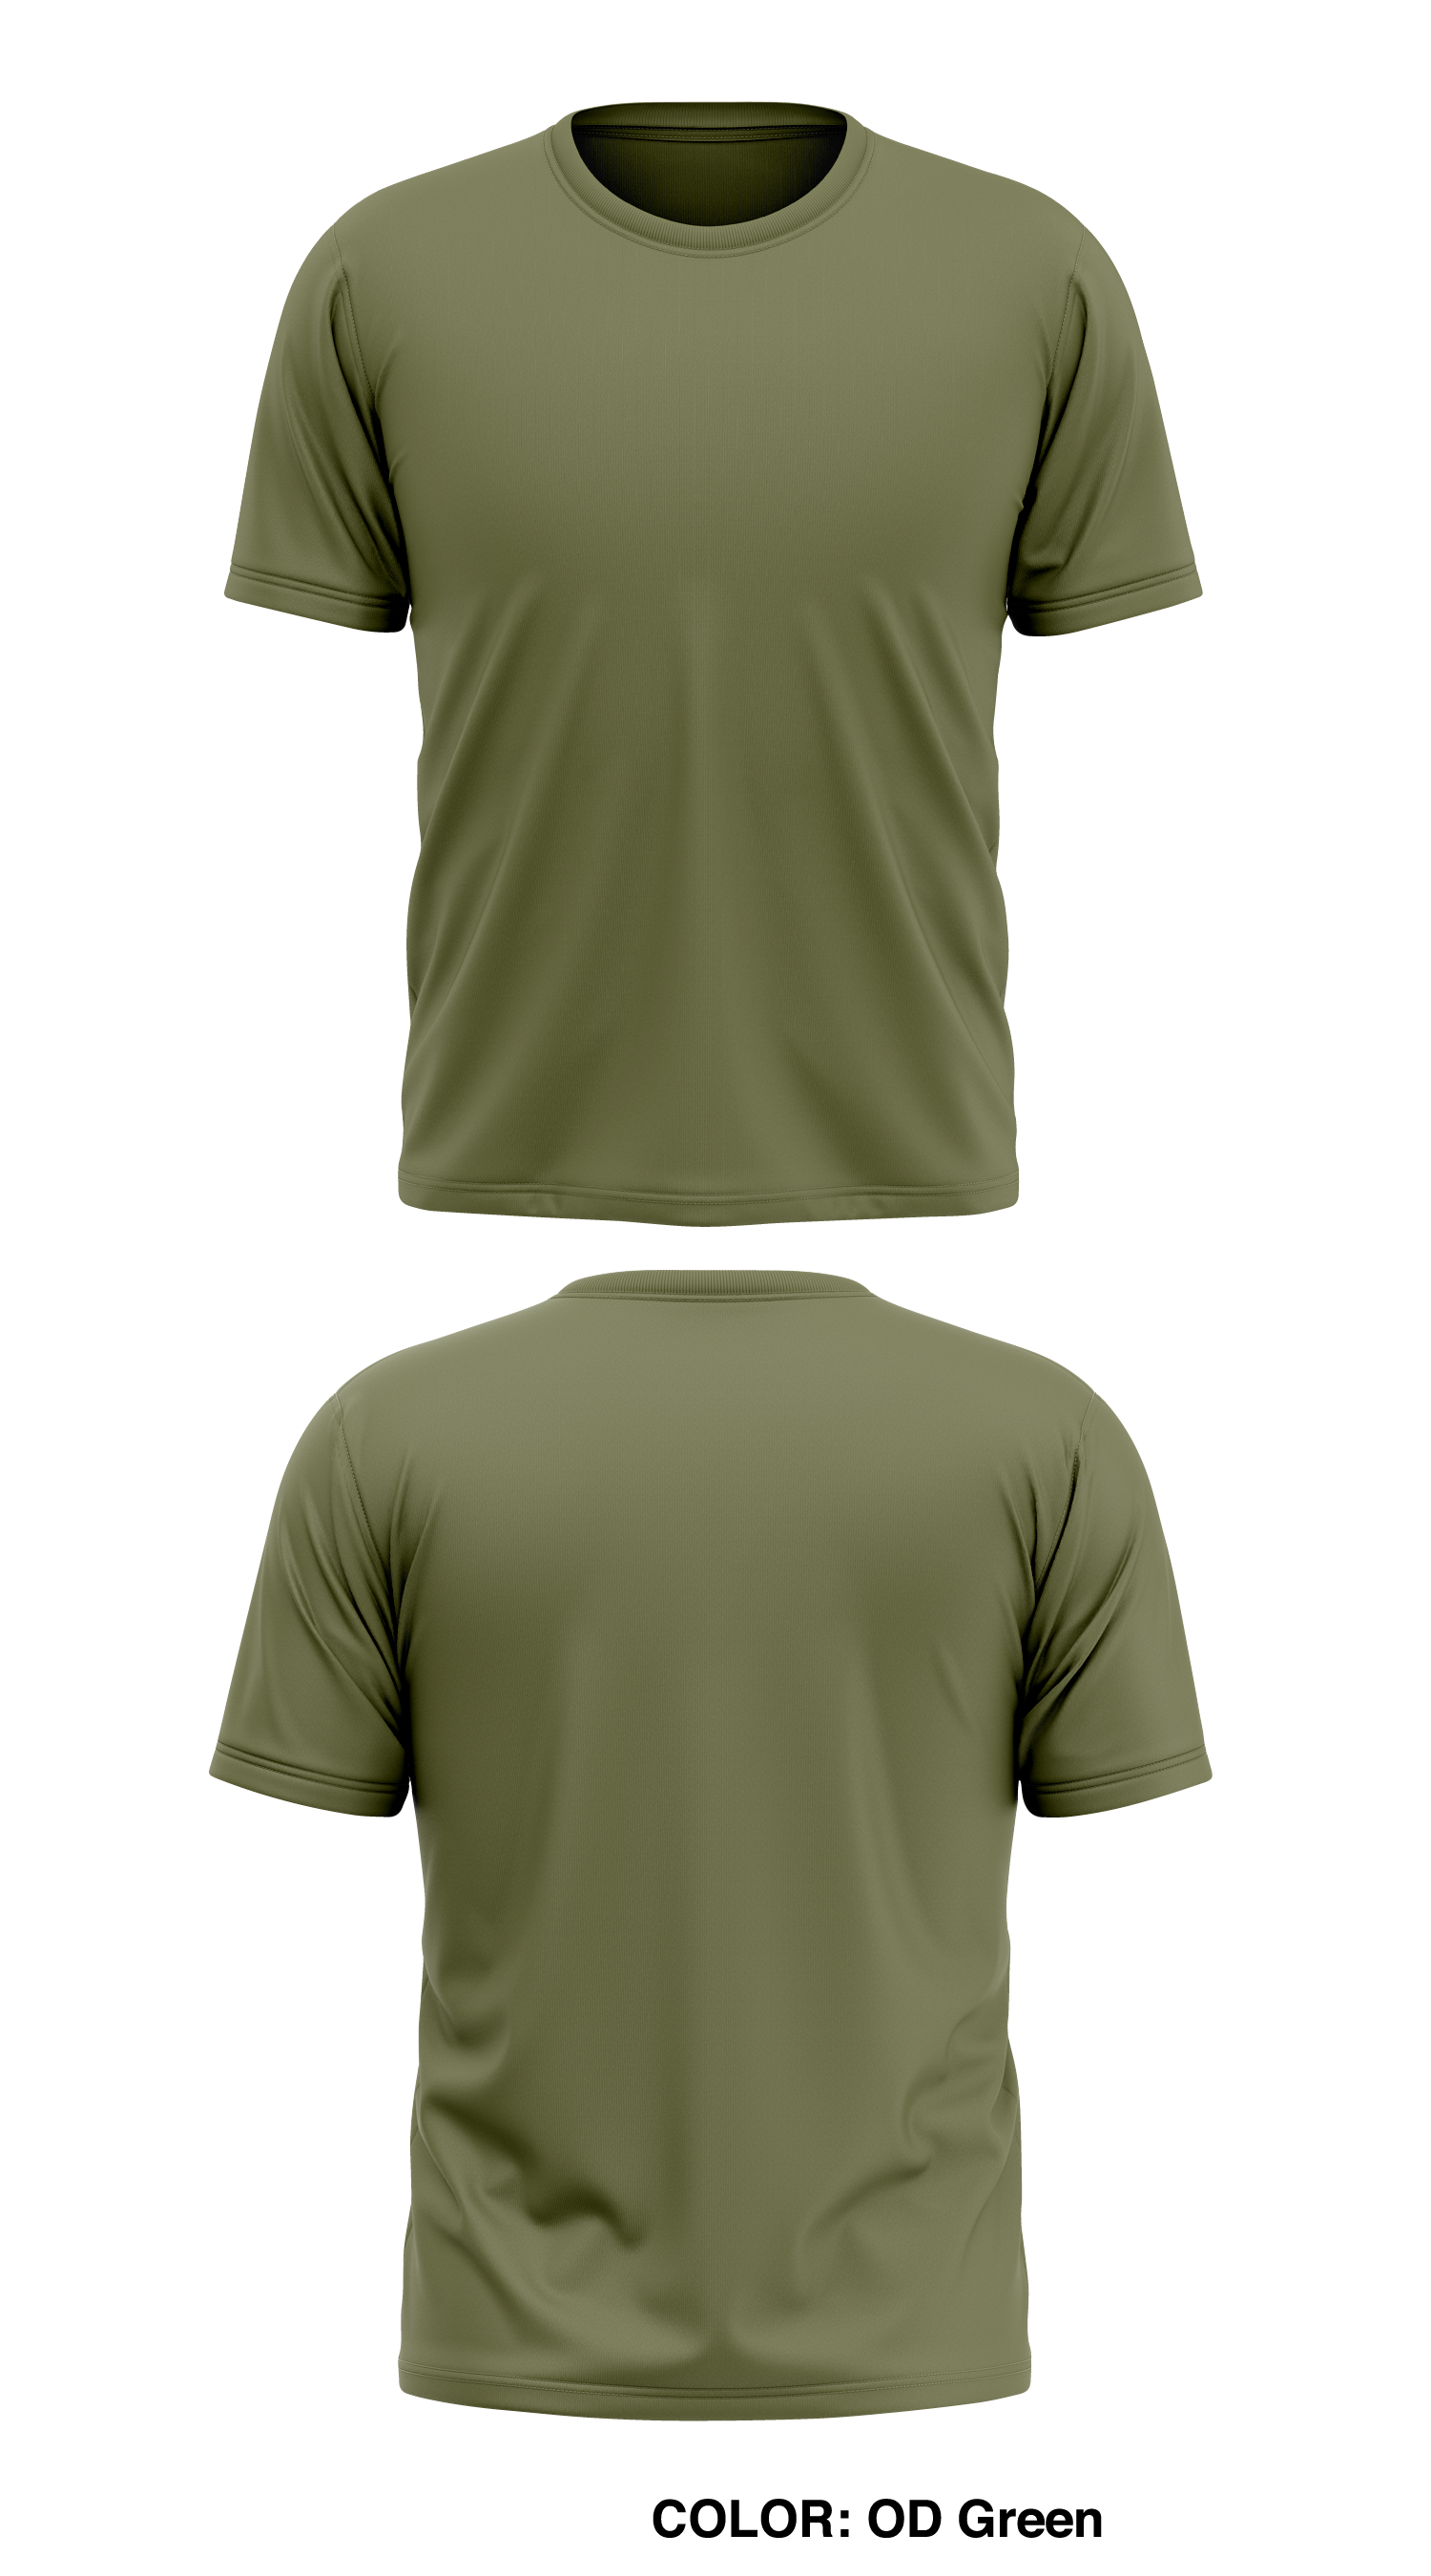 Short Core Men's SS Performance - OD Green Blank Athletic